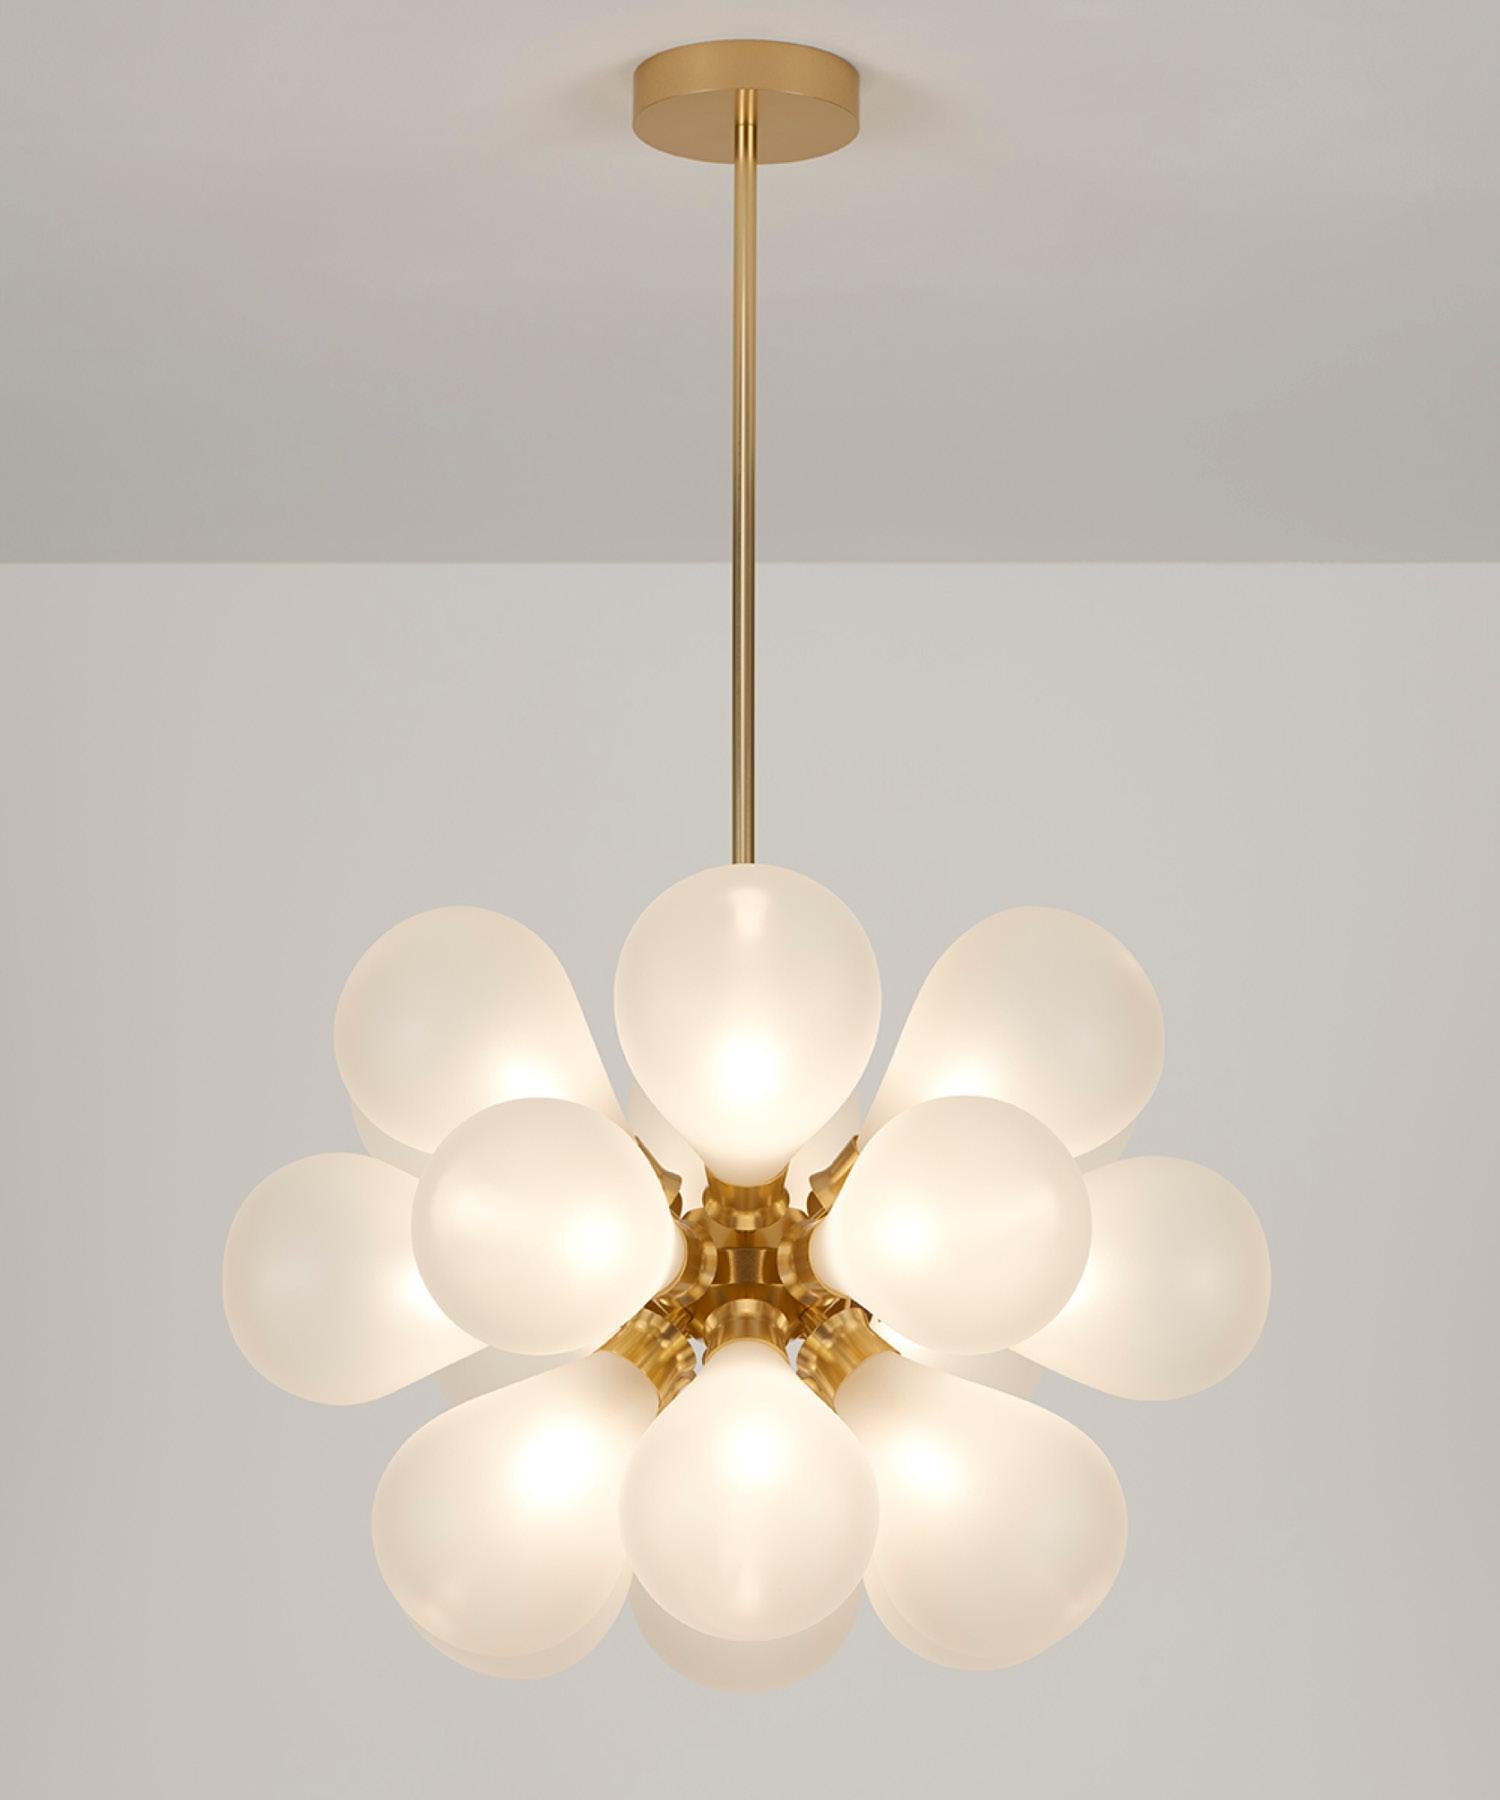 Anodized Cintola Maxi Pendant in Satin Bronze with 18 Handblown Frosted Glass Globes For Sale